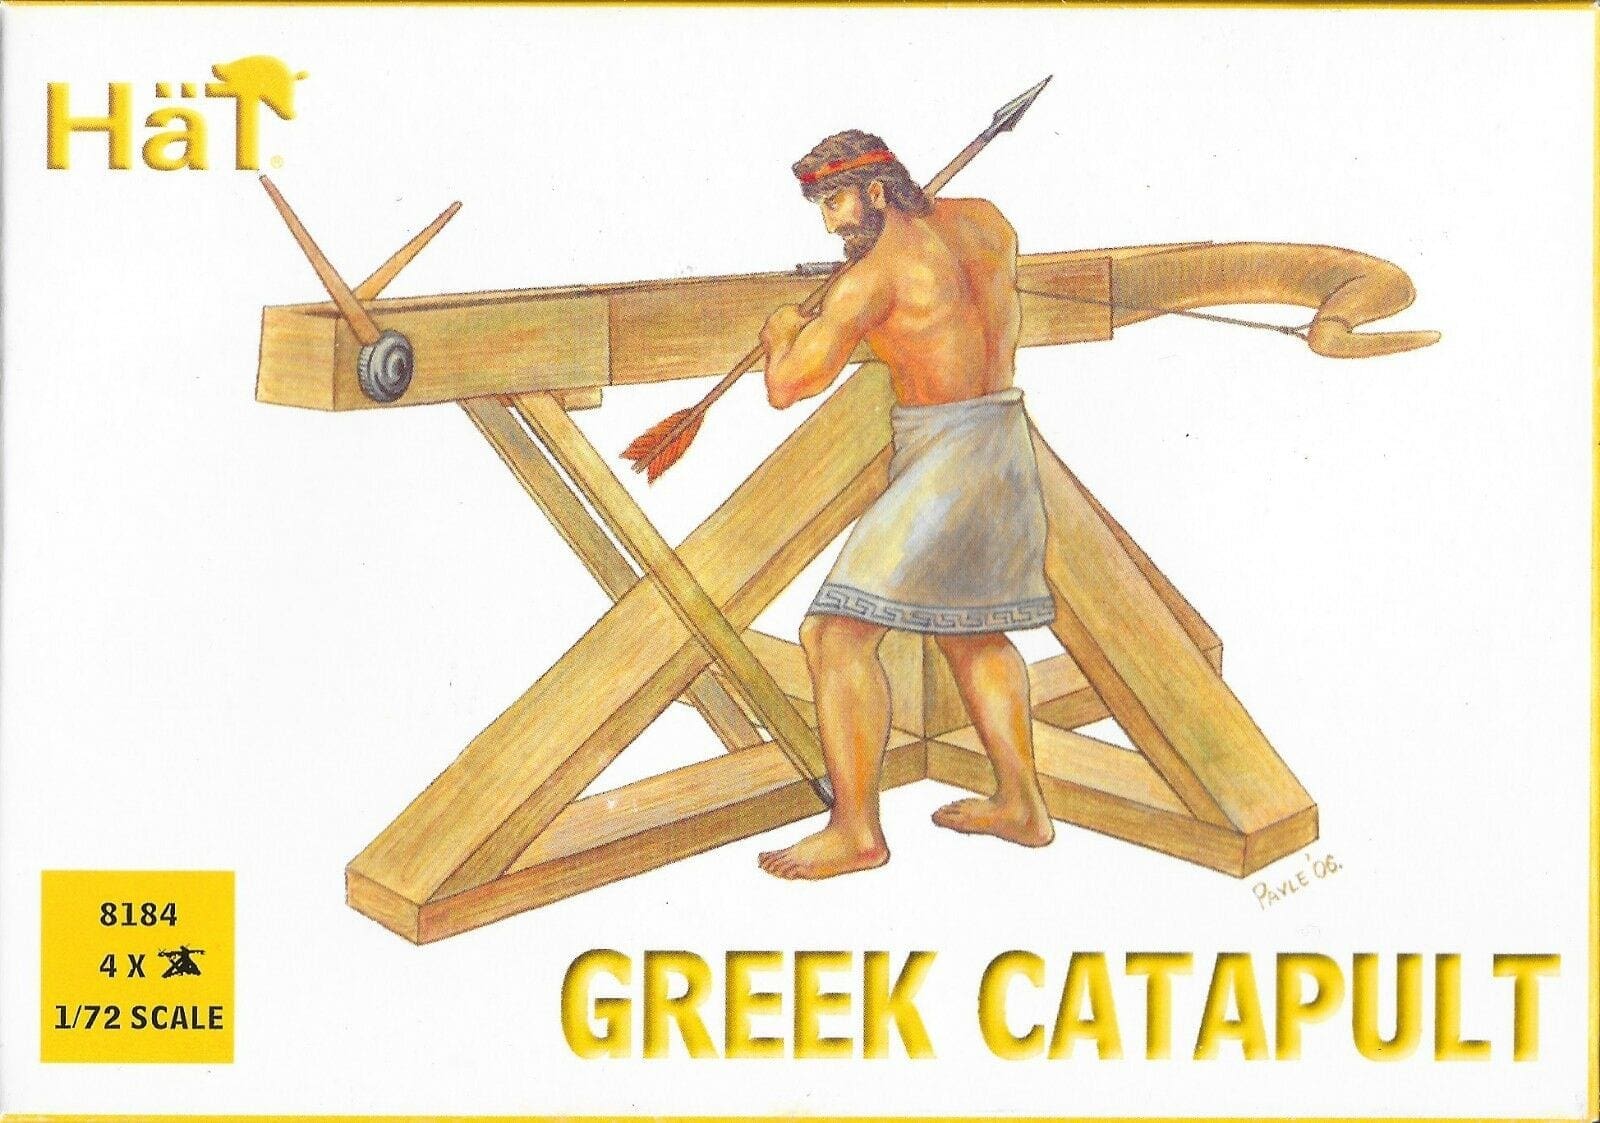 Hat 8184 grec catapulte 4 catapultes 24 Guerriers X 1:72 scale - NEUF 2007 